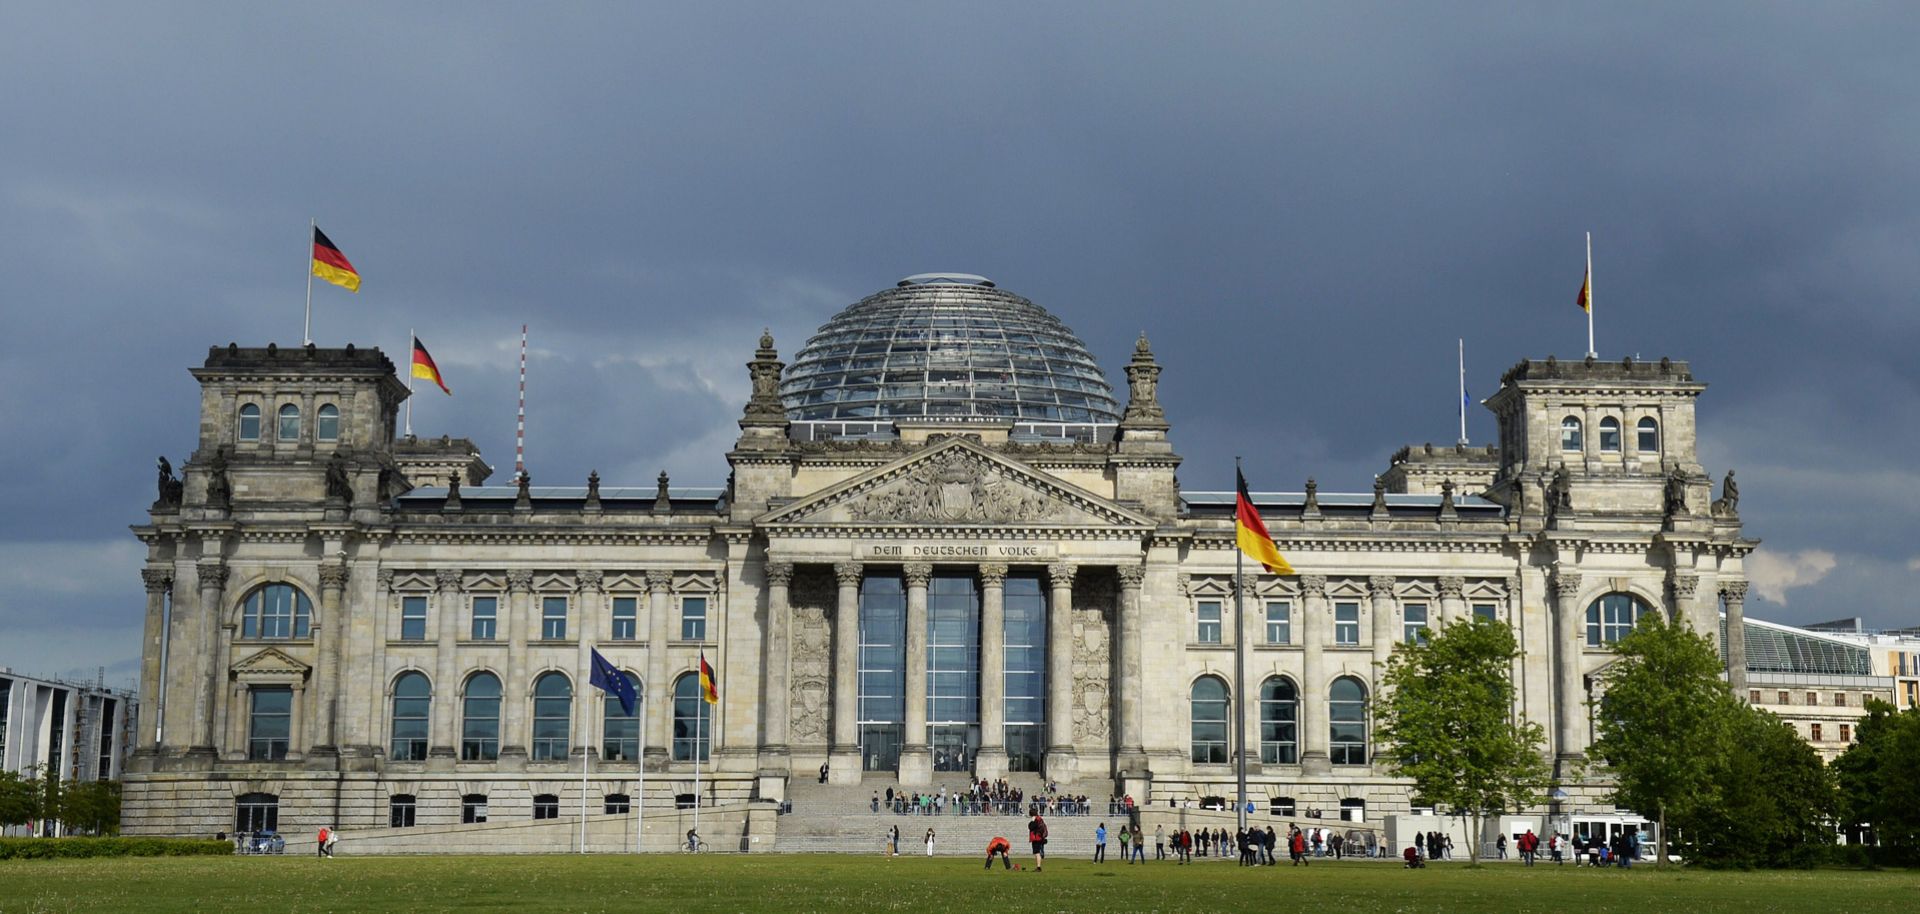 Dark clouds over the Reichstag building in Berlin may be a sign of things to come.